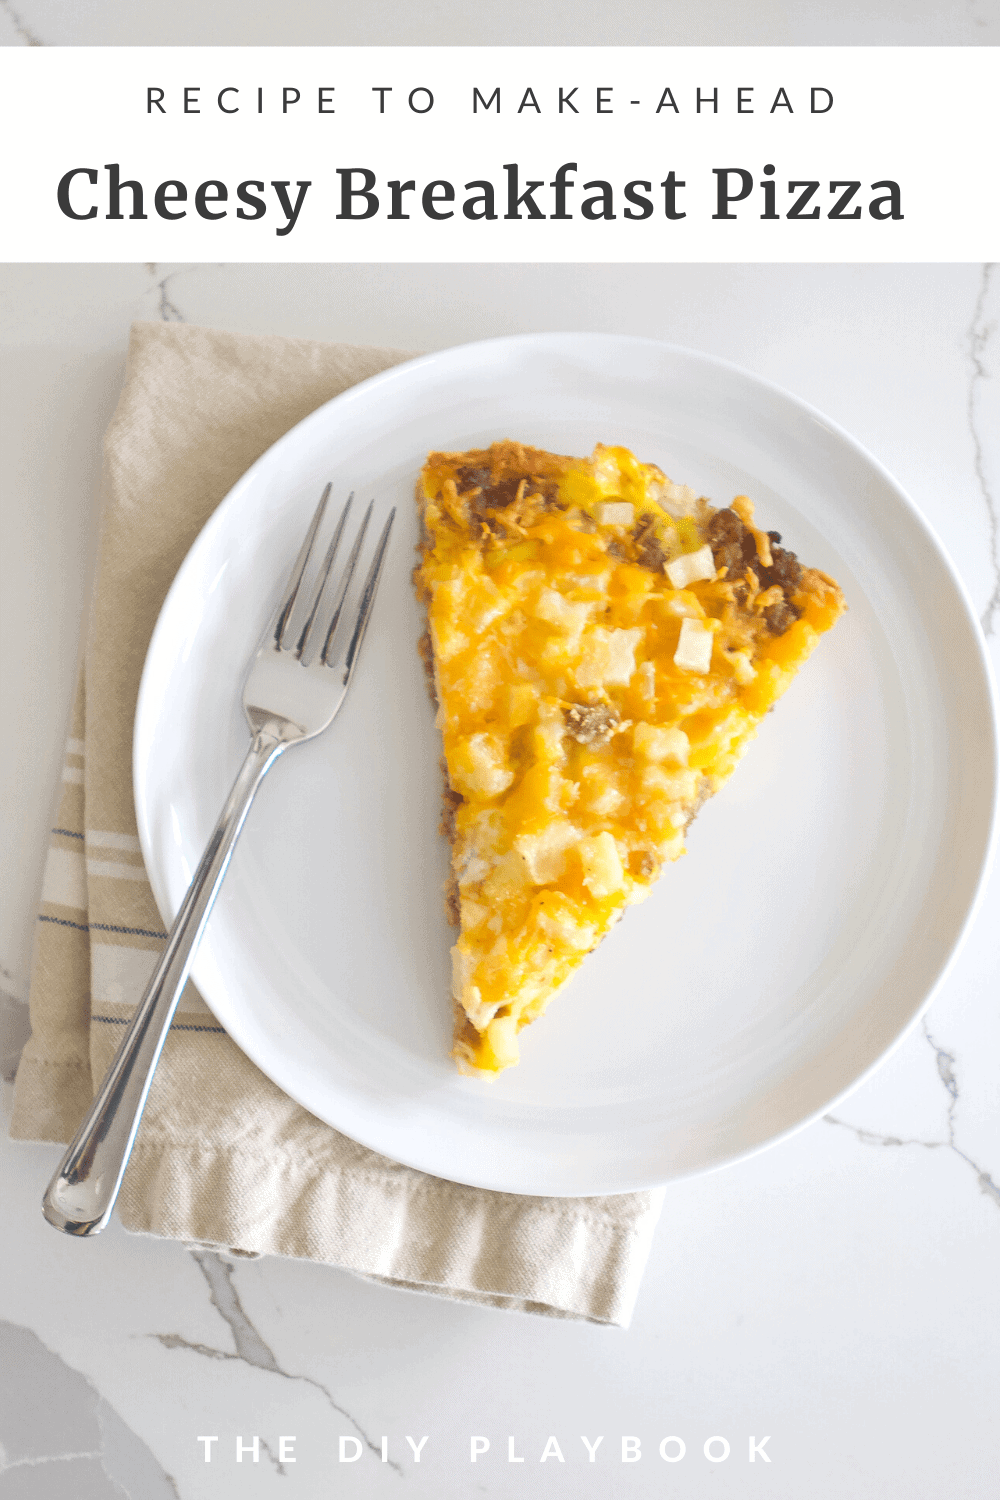 My favorite cheesy breakfast pizza recipe that is great for any holiday or family meal